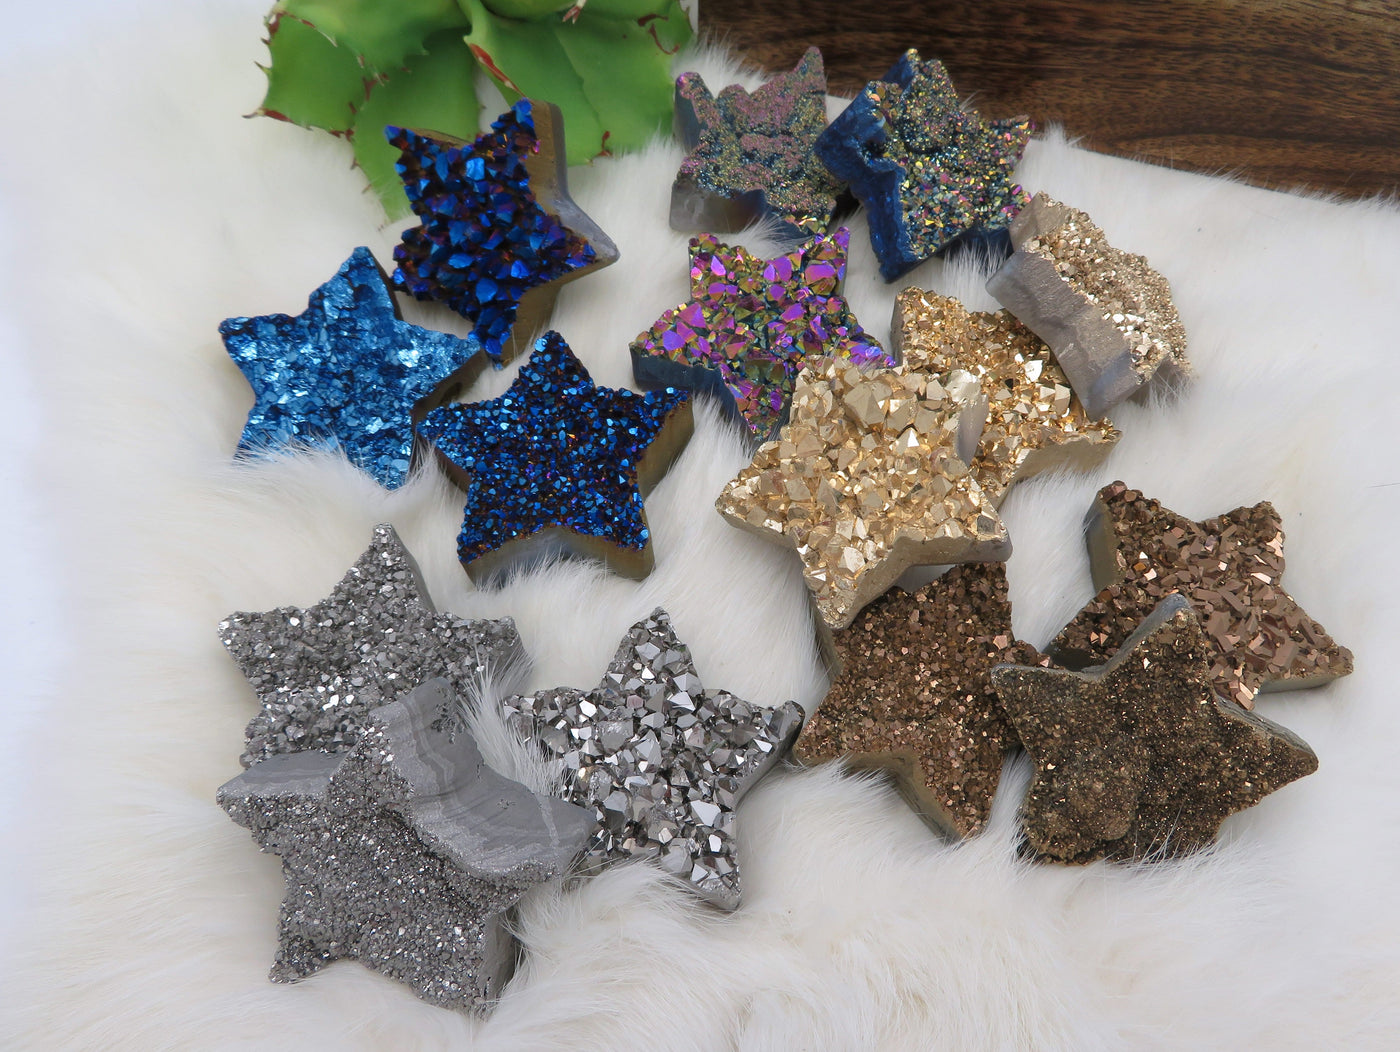 Fifteen Titanium Treated Druzy Stars displayed on a white fuzzy surface.